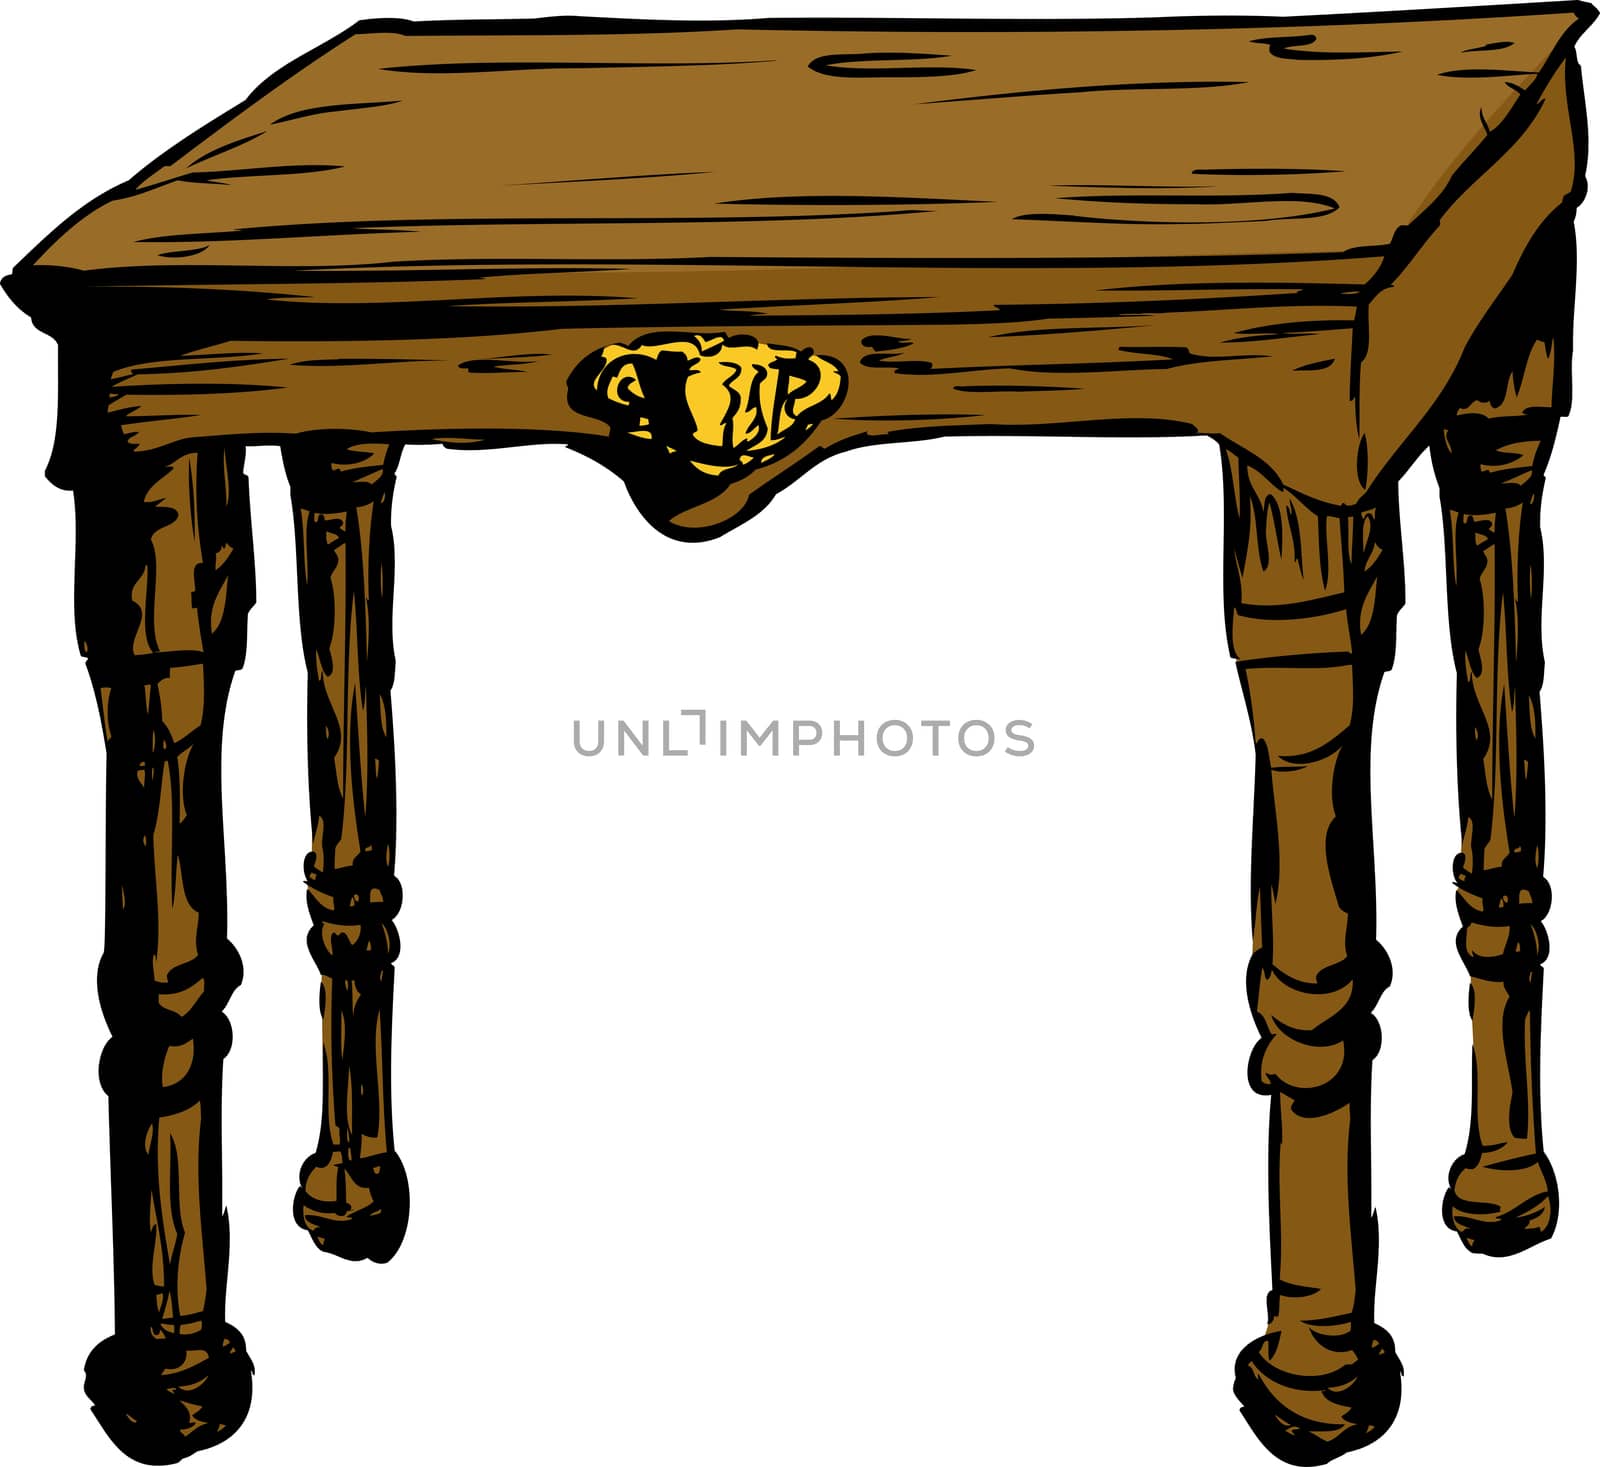 Single old fashioned wooden table with decoration over isolated white background